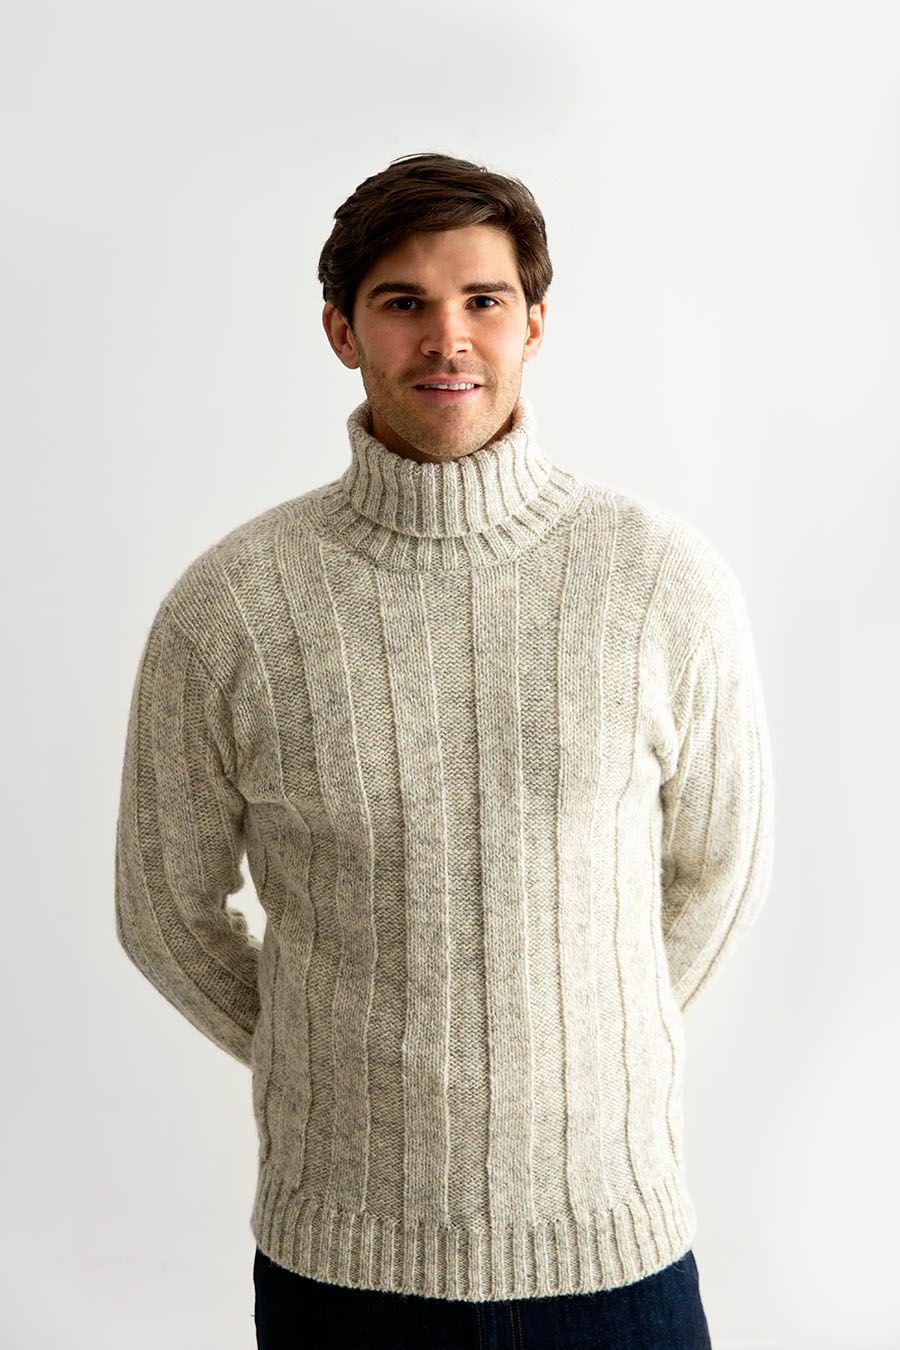 https://www.thecrofthouse.com/media/catalog/product/cache/0445402dfd76de54c4da8f3253d786cc/m/e/mens_undyed_wool_polo_neck_ribbed_jumper_turtle_neck_sweater_1.jpg